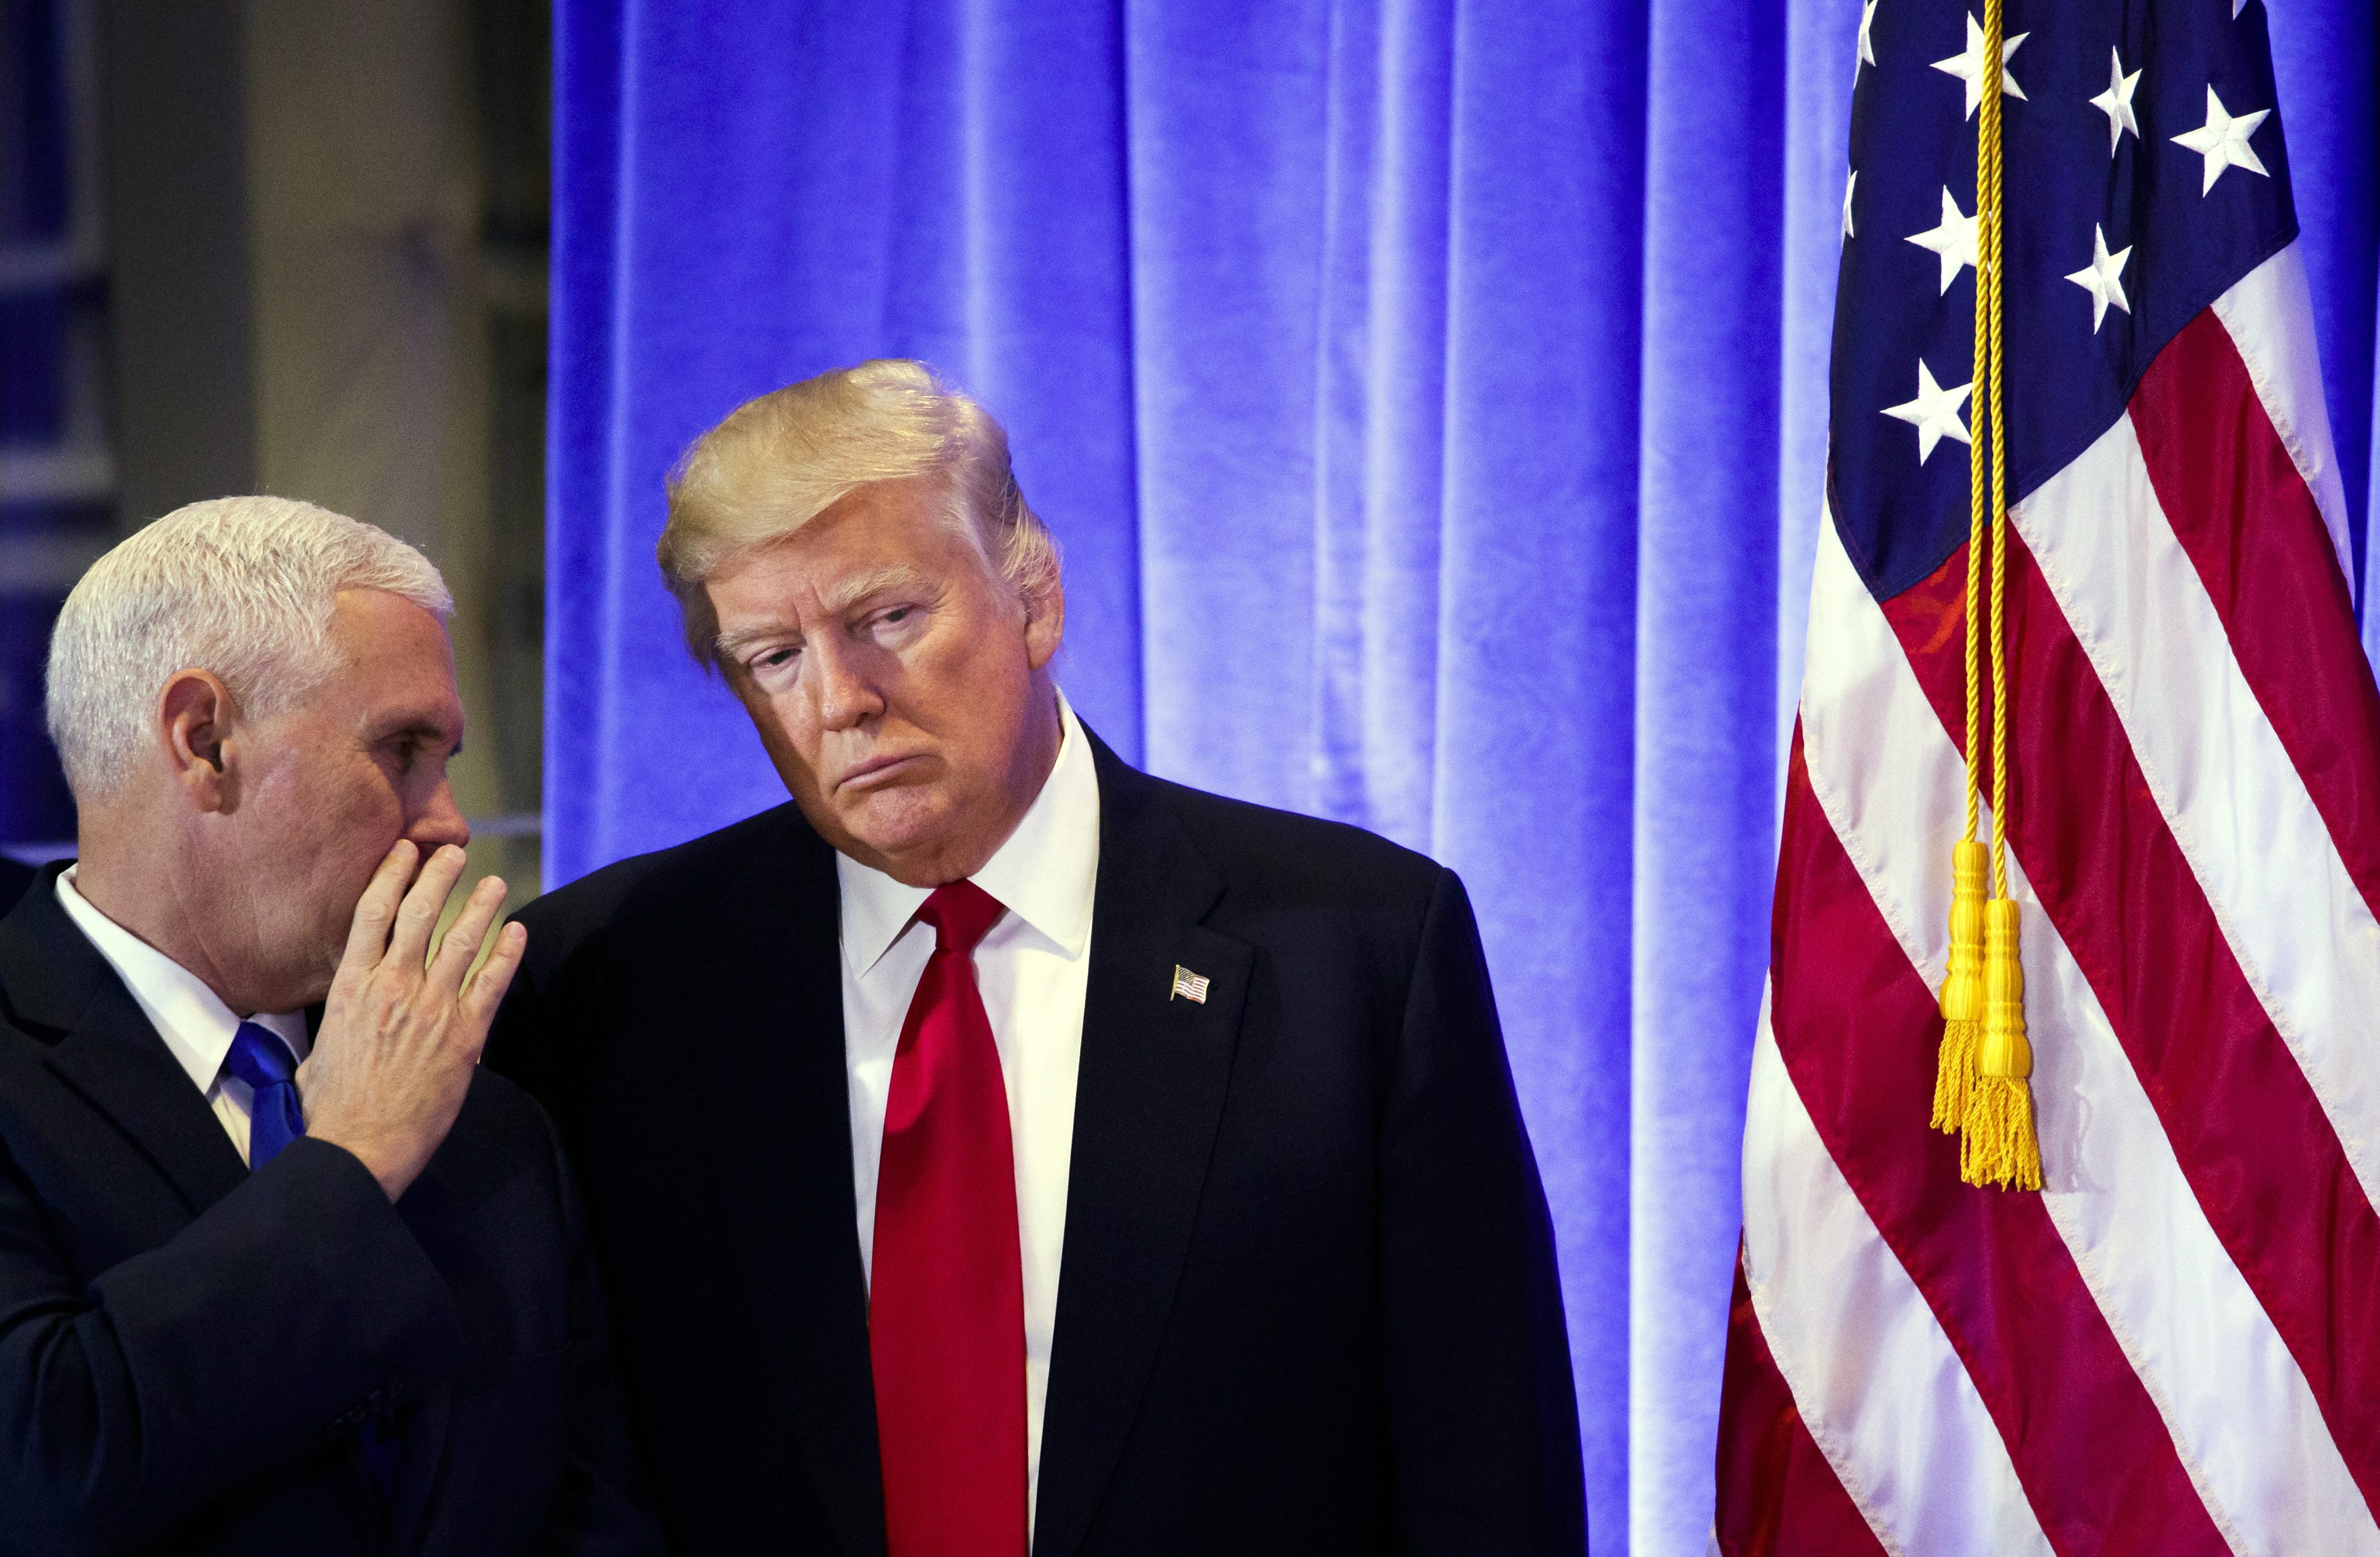 2017-01-11 09:01:30 epaselect epa05711343 US President-elect Donald Trump (C) talks with Vice-President-Elect Mike Pence (L) during a press conference in the lobby of Trump Tower in New York, New York, USA, 11 January 2017. Trump, who is set to take the Oath of Office on 20 January 2017, gave his first press conference in nearly 6 months. EPA/JUSTIN LANE